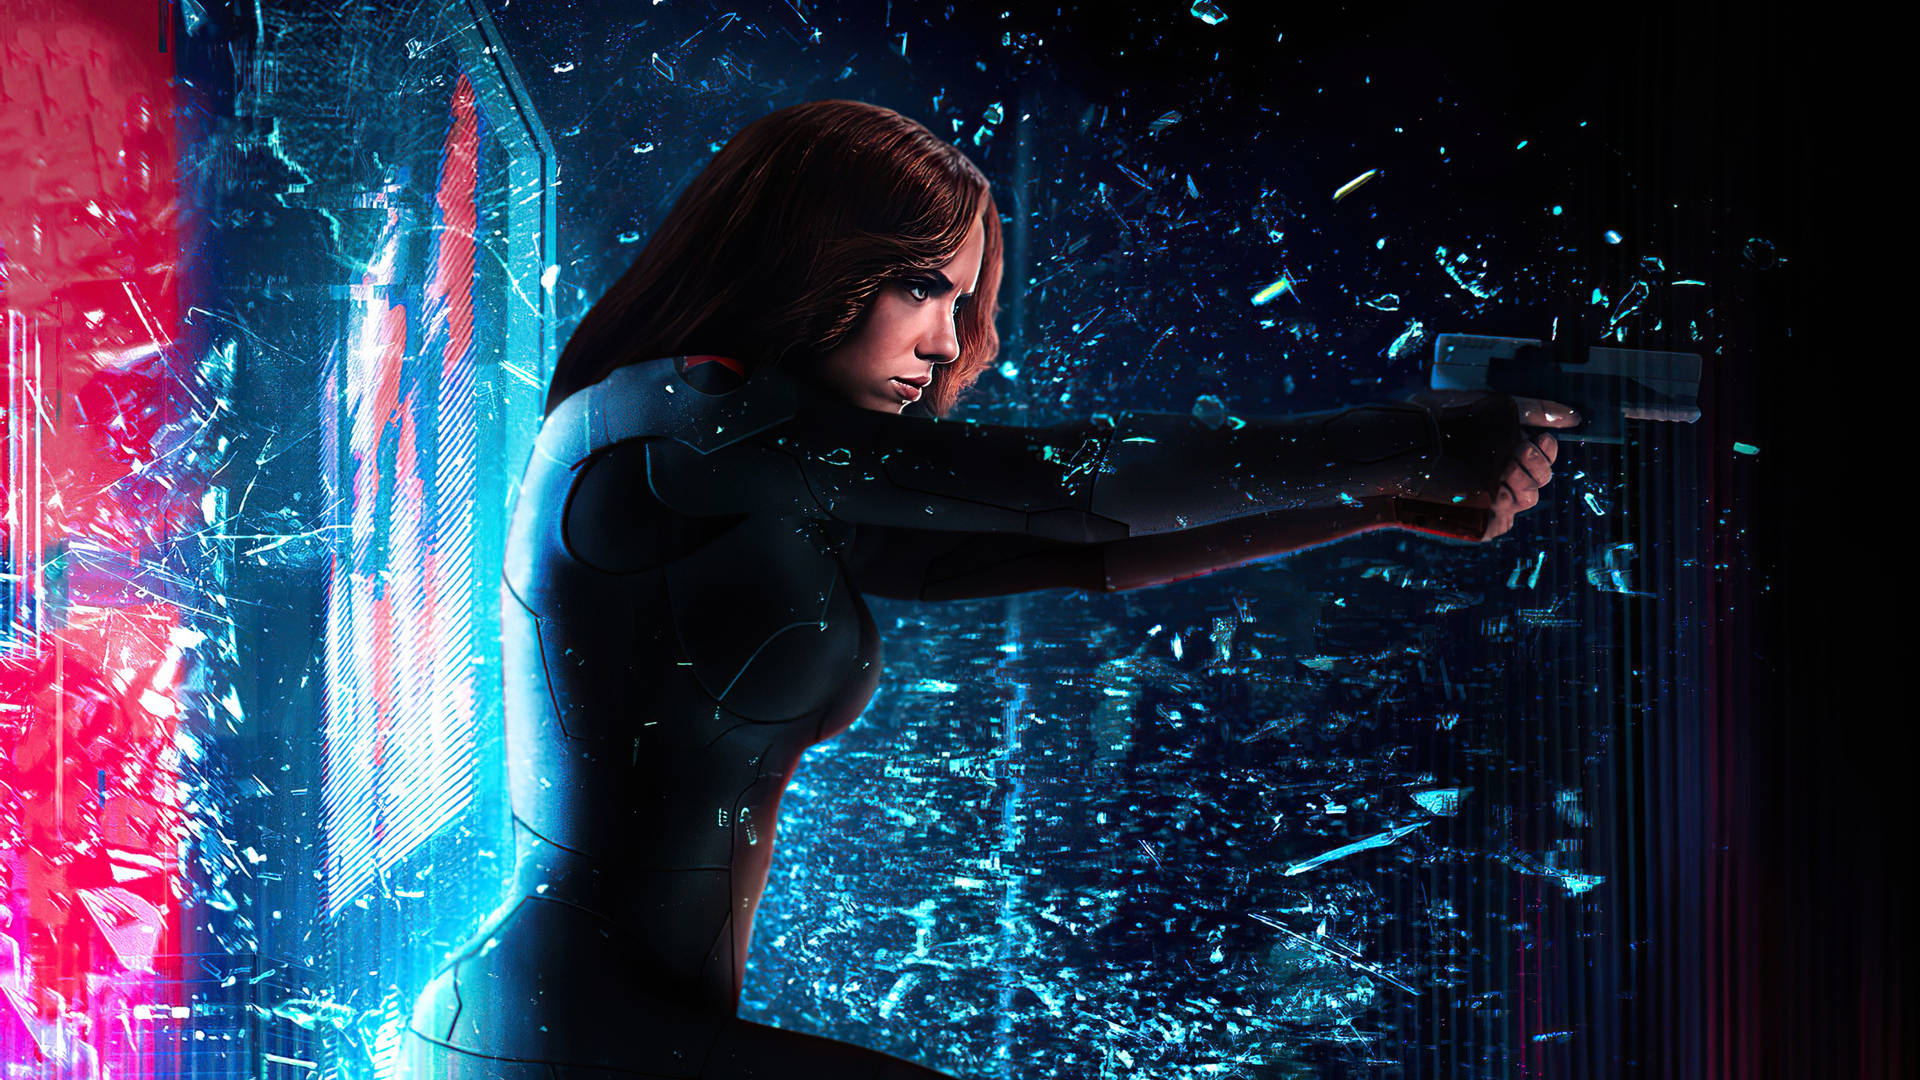 10 Black Widow Cosplay That Look Just Like The Marvel Comics